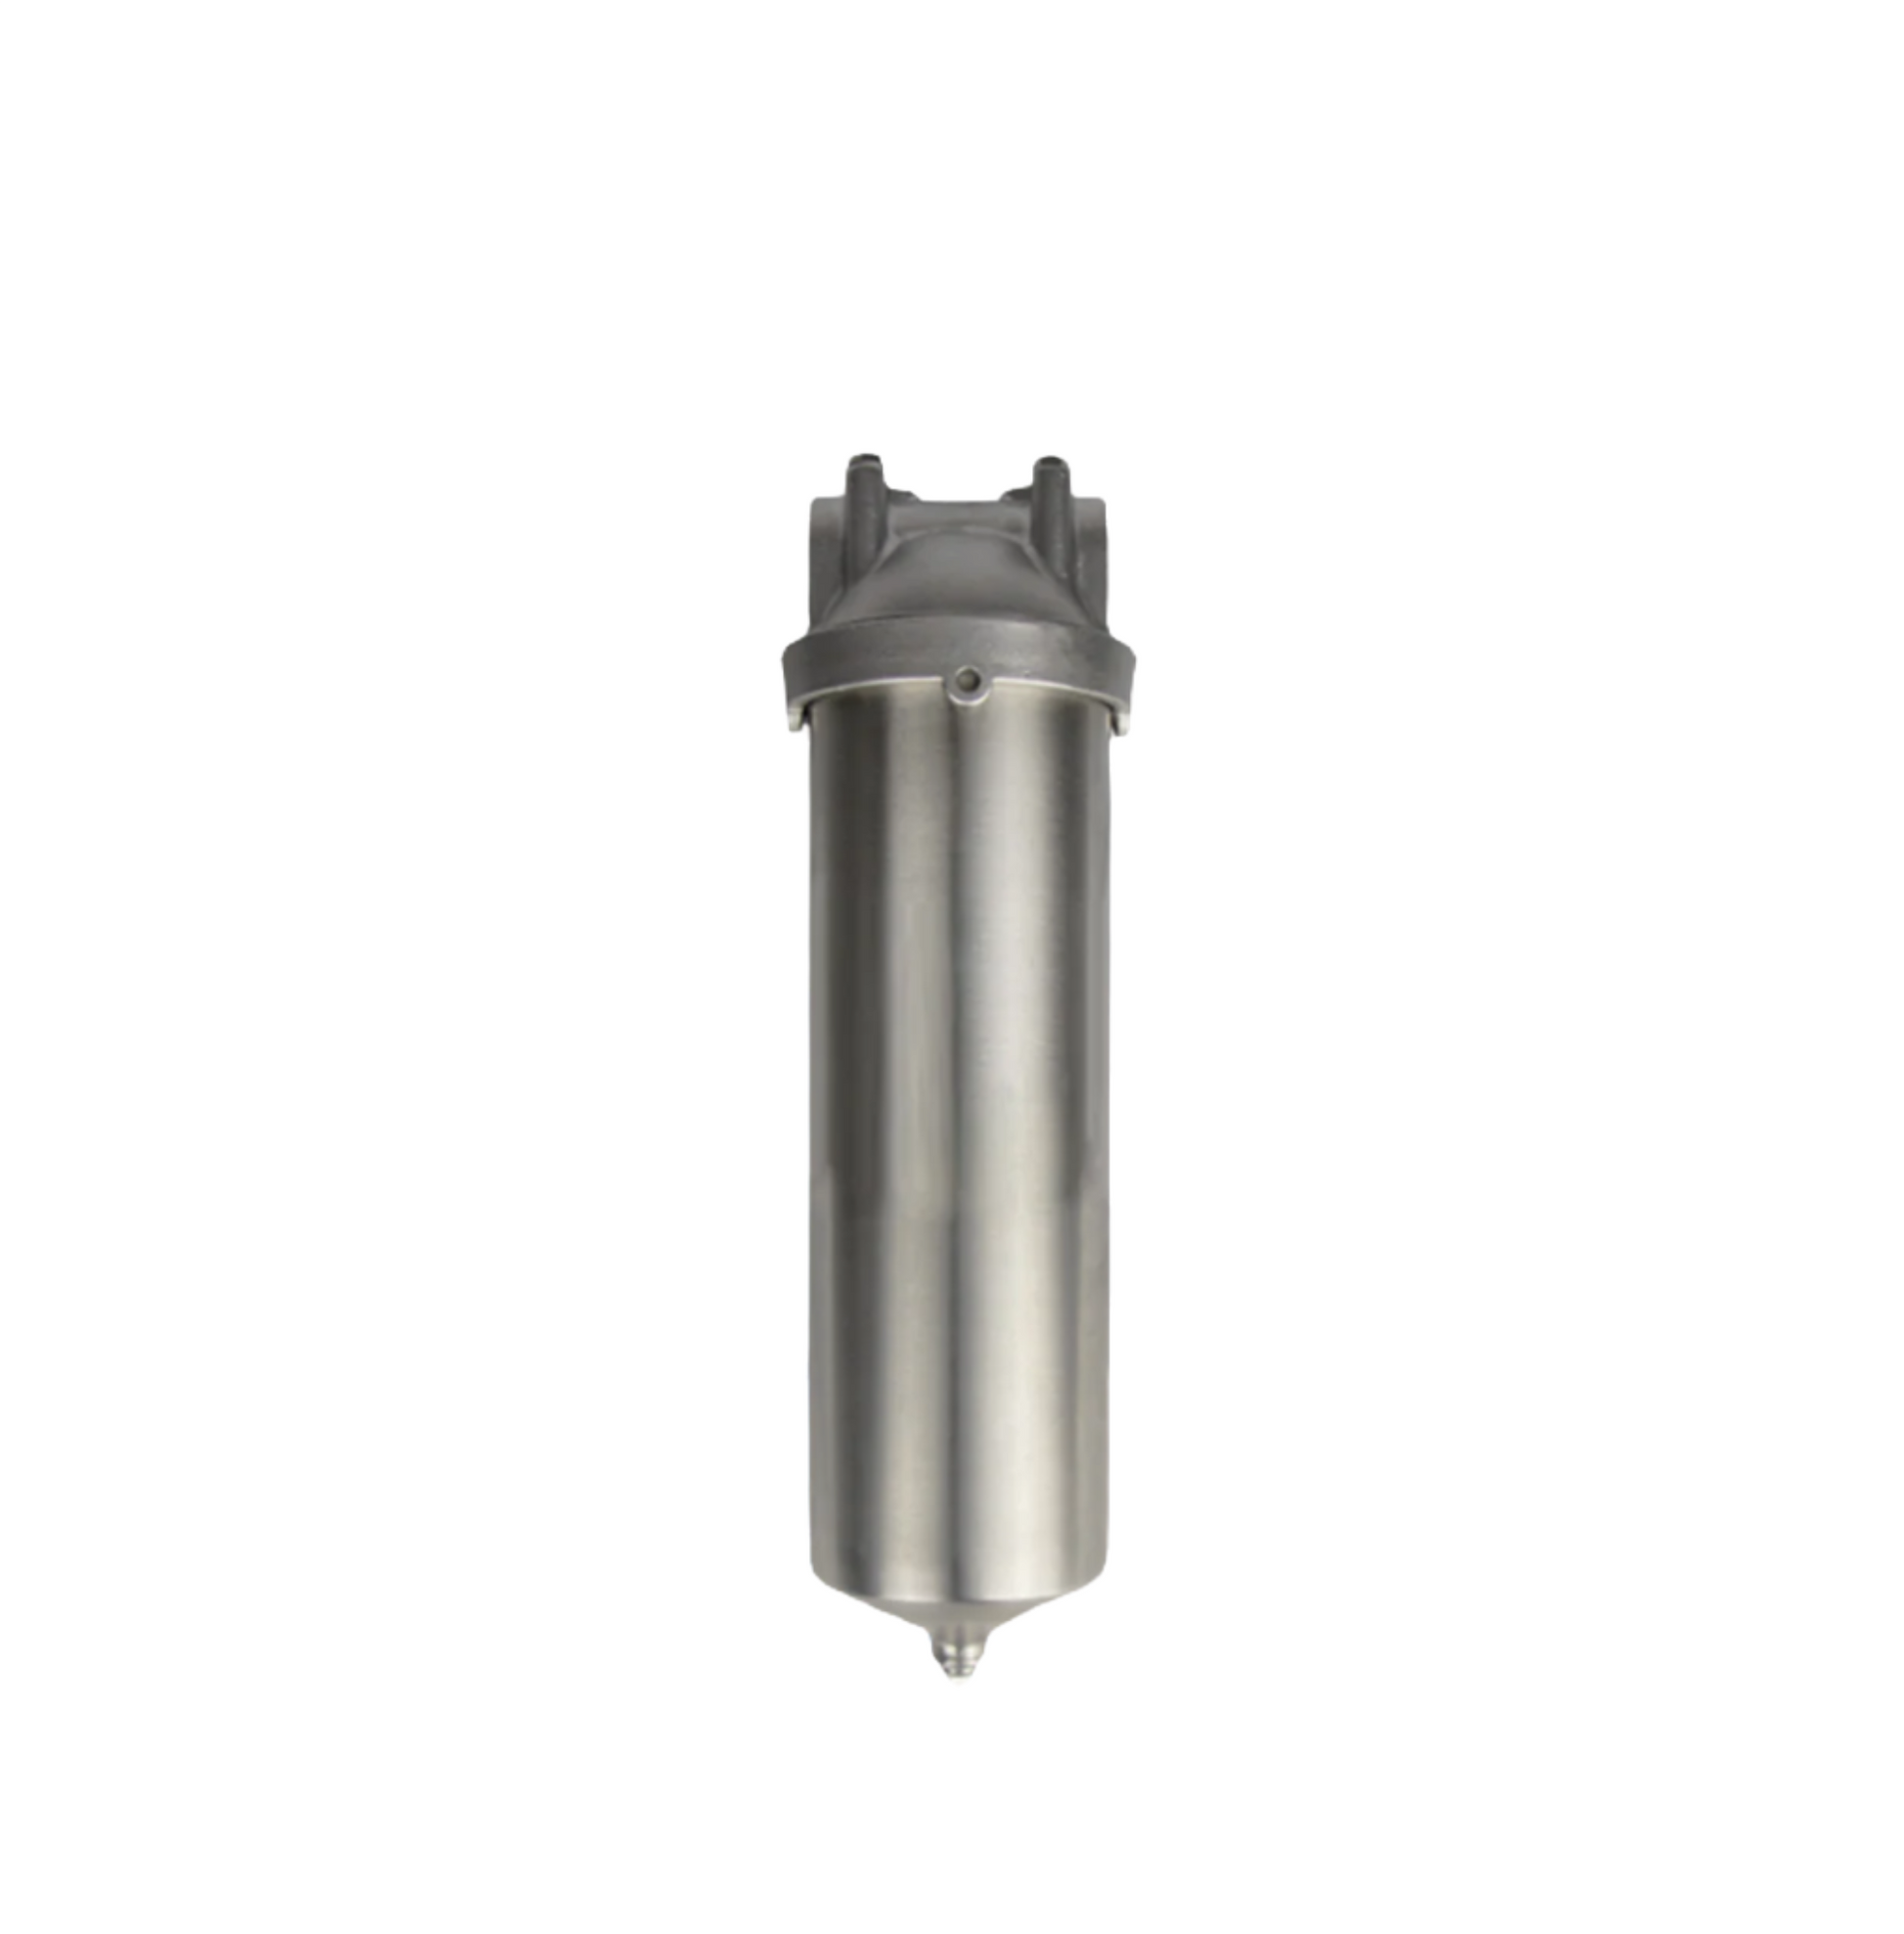 CORE Stainless Steel Filter Housing 1 x 30" With 1" Ports